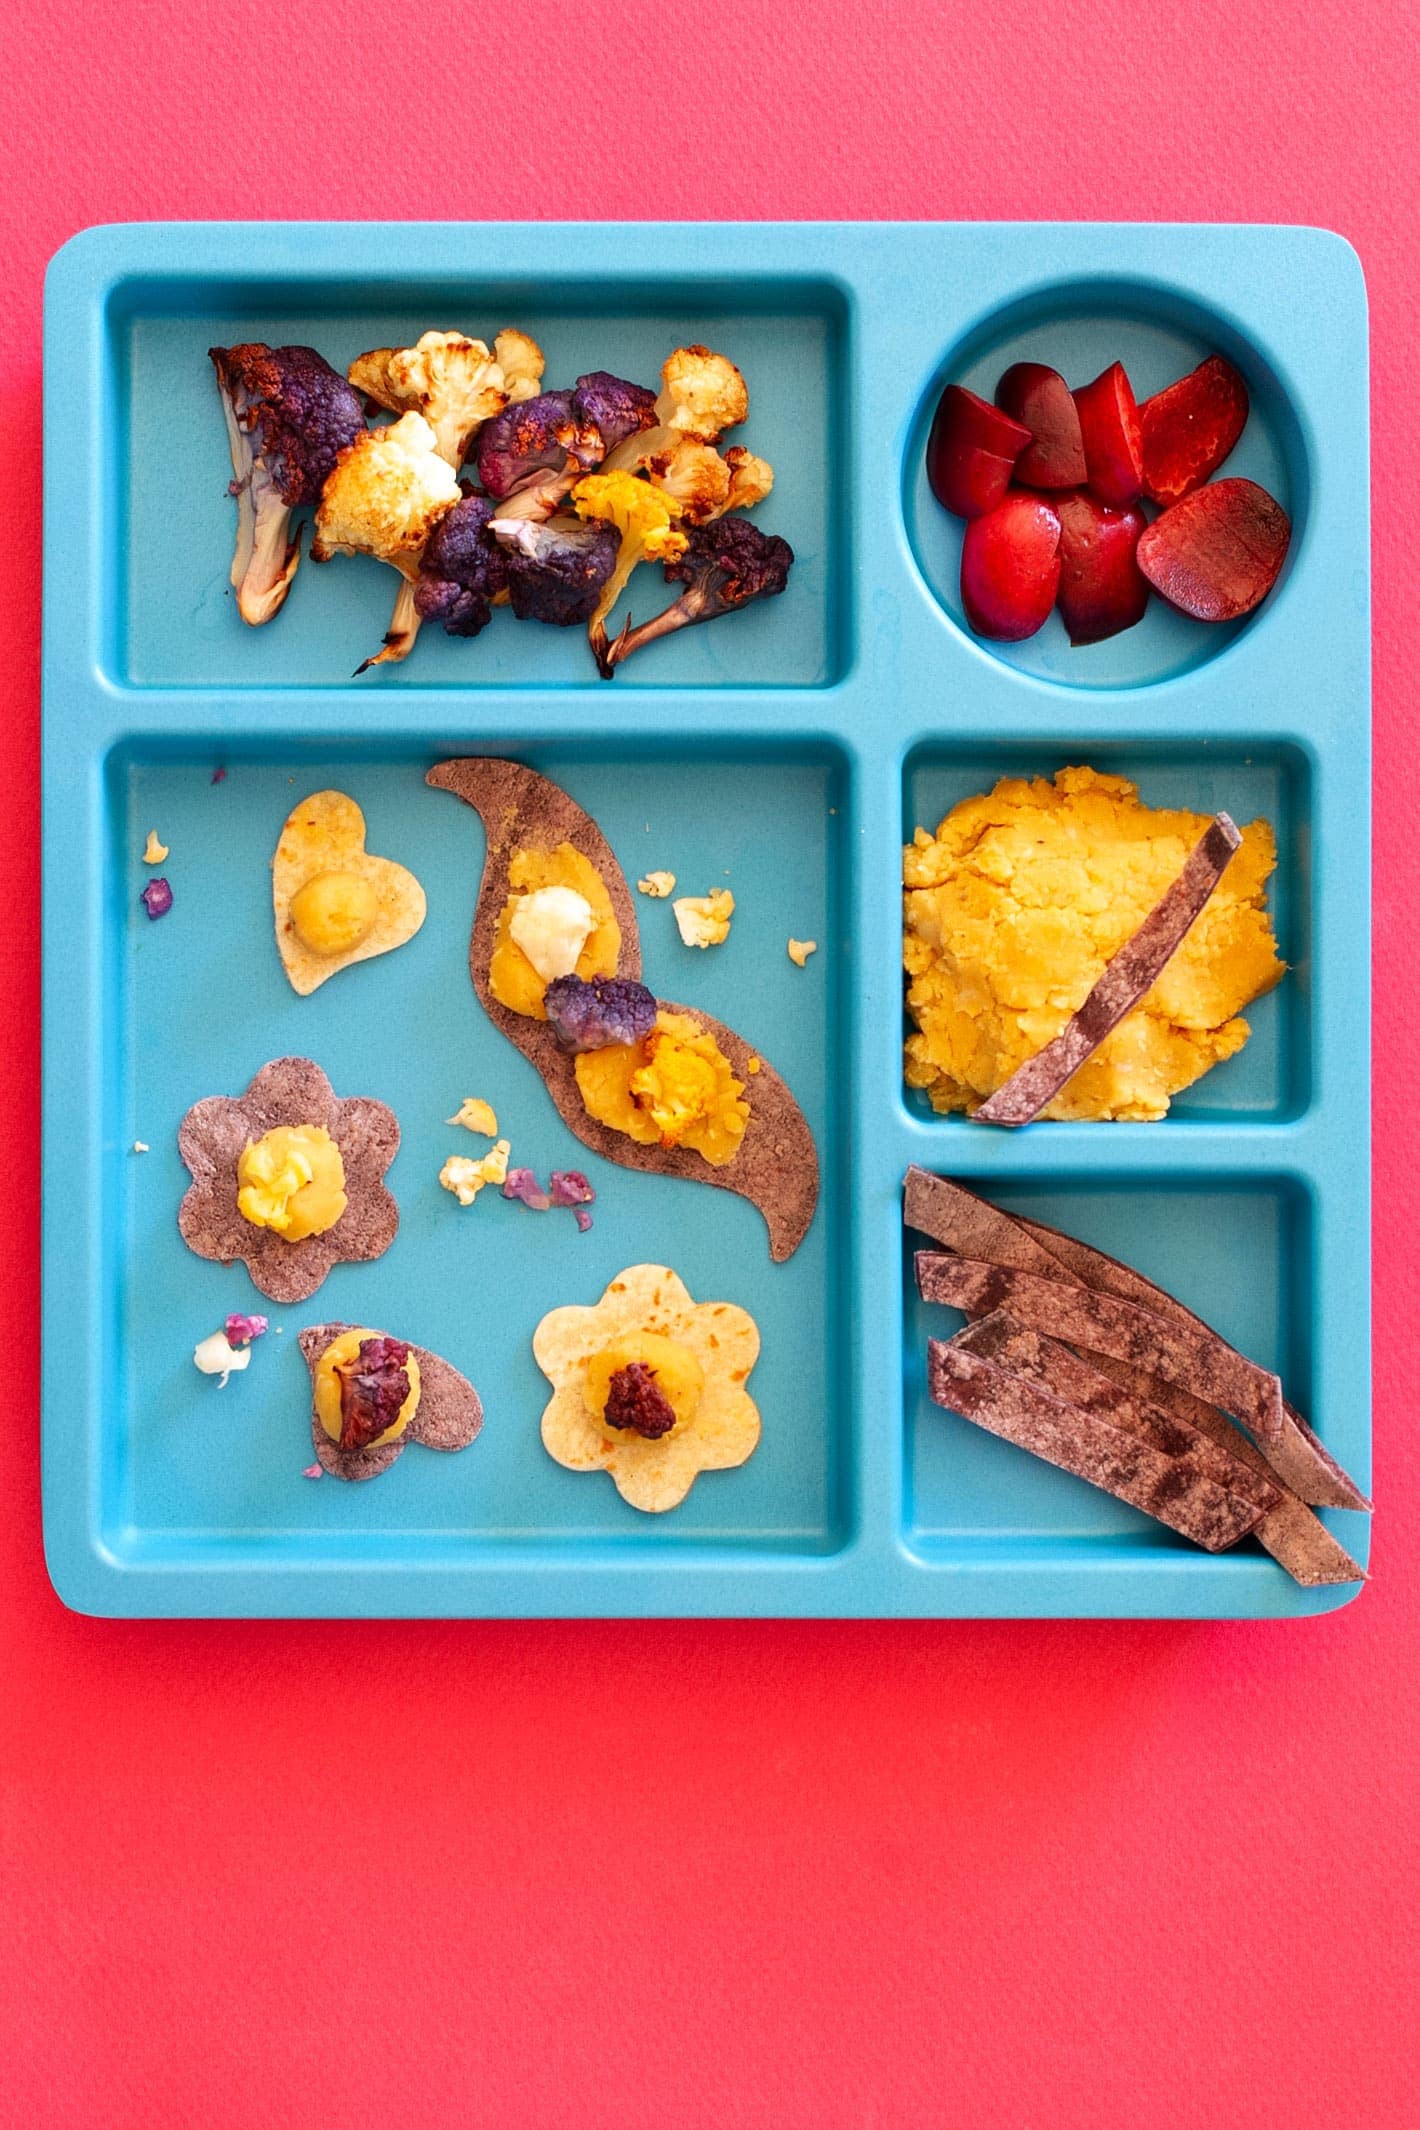 Top-down view of a blue bamboo kids plate filled with roasted purple and orange cauliflower, slices of fresh cherries, cooked red lentils, purple tortilla strips, and mini tacos in the shape of hearts, flowers, and a mustache.